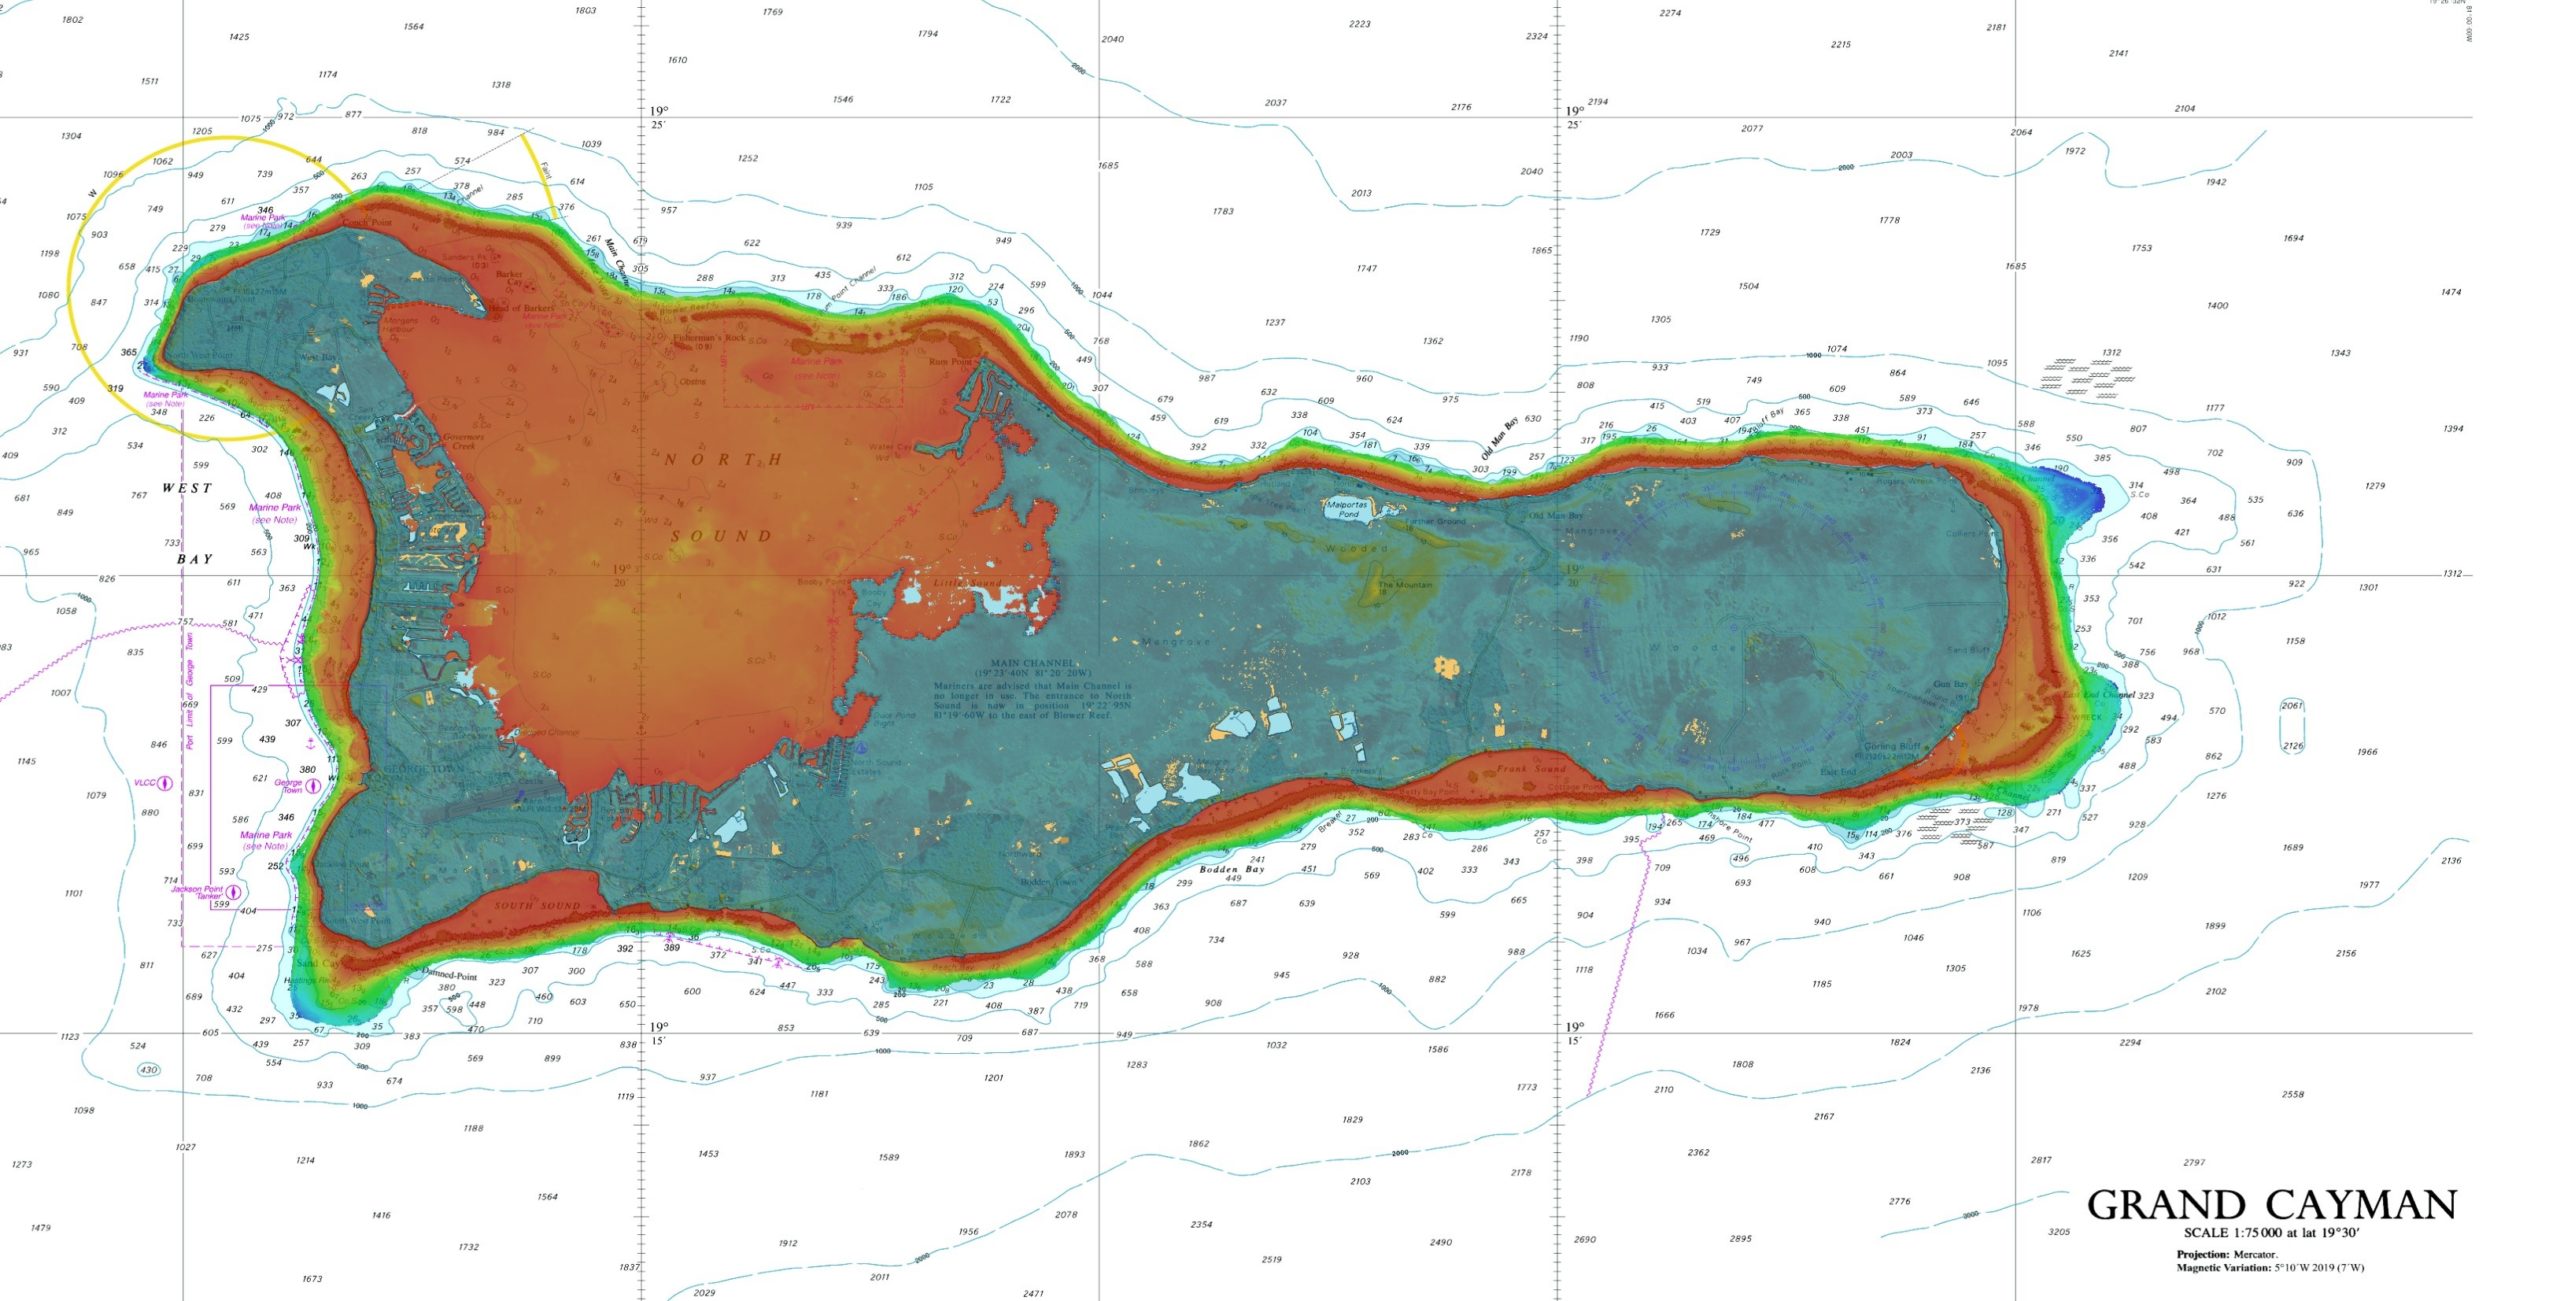 UK Hydrographic Office data to help drive maritime trade and growth in Cayman Islands